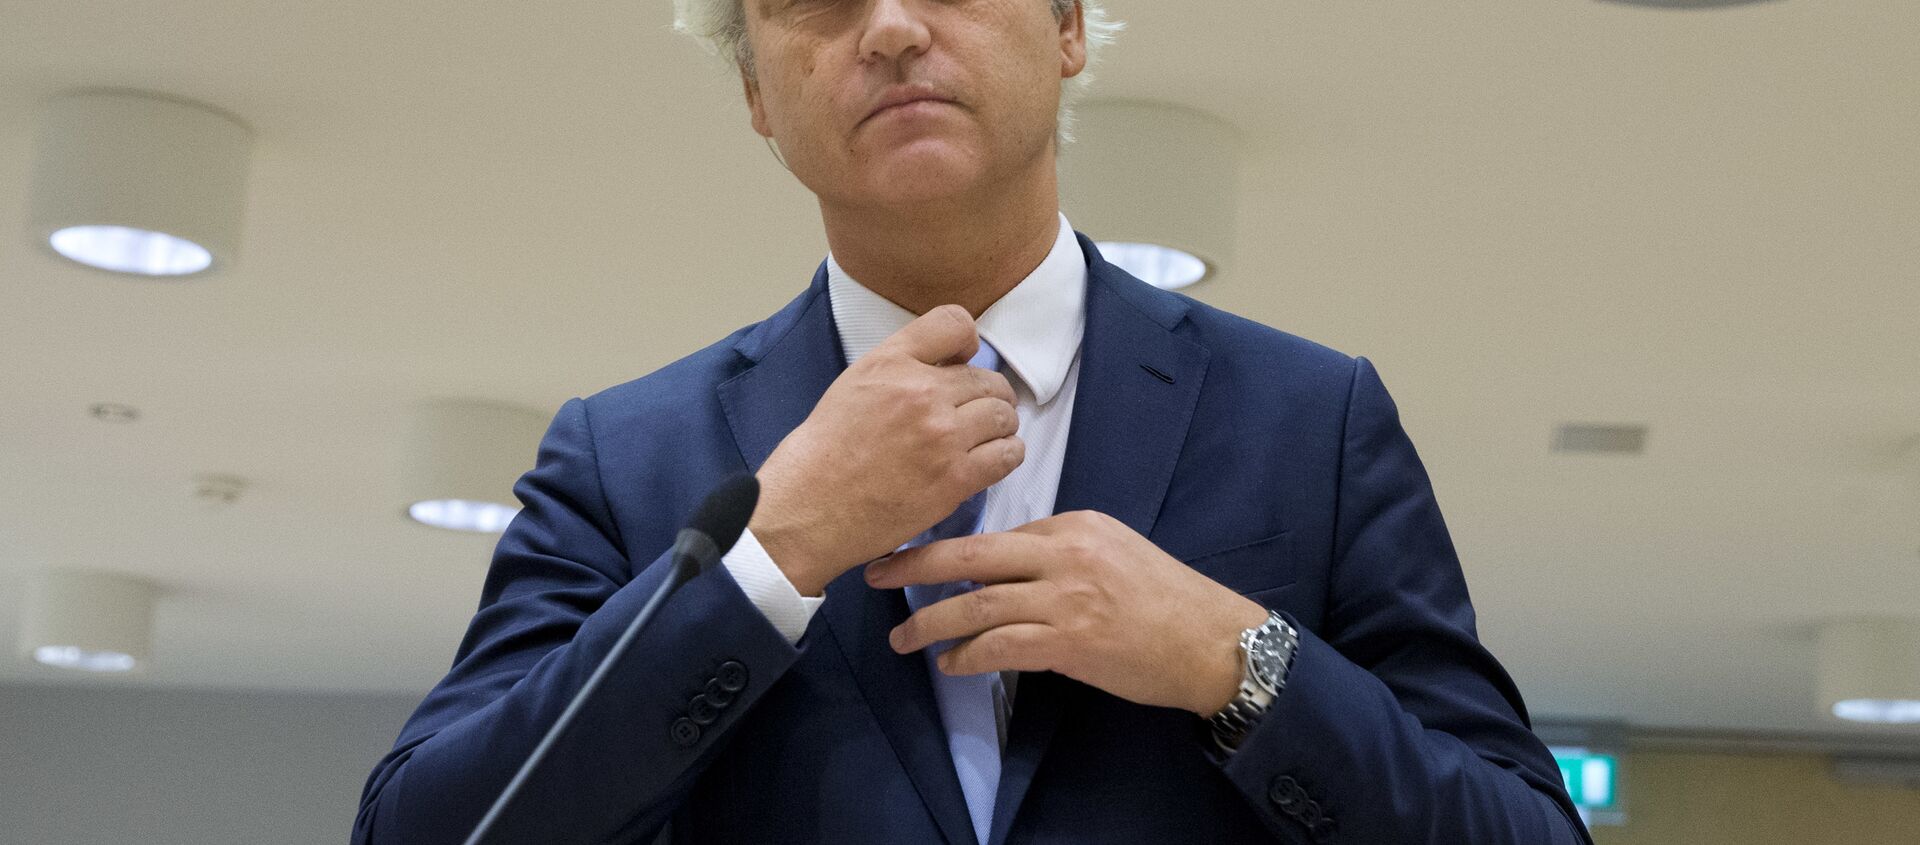 Populist anti-Islam lawmaker Geert Wilders prepares to address judges at the high-security court near Schiphol Airport, Amsterdam, Wednesday, Nov. 23, 2016, during his hate-speech trial that pits freedom of expression against the Netherlands' anti-discrimination laws - Sputnik International, 1920, 29.12.2019